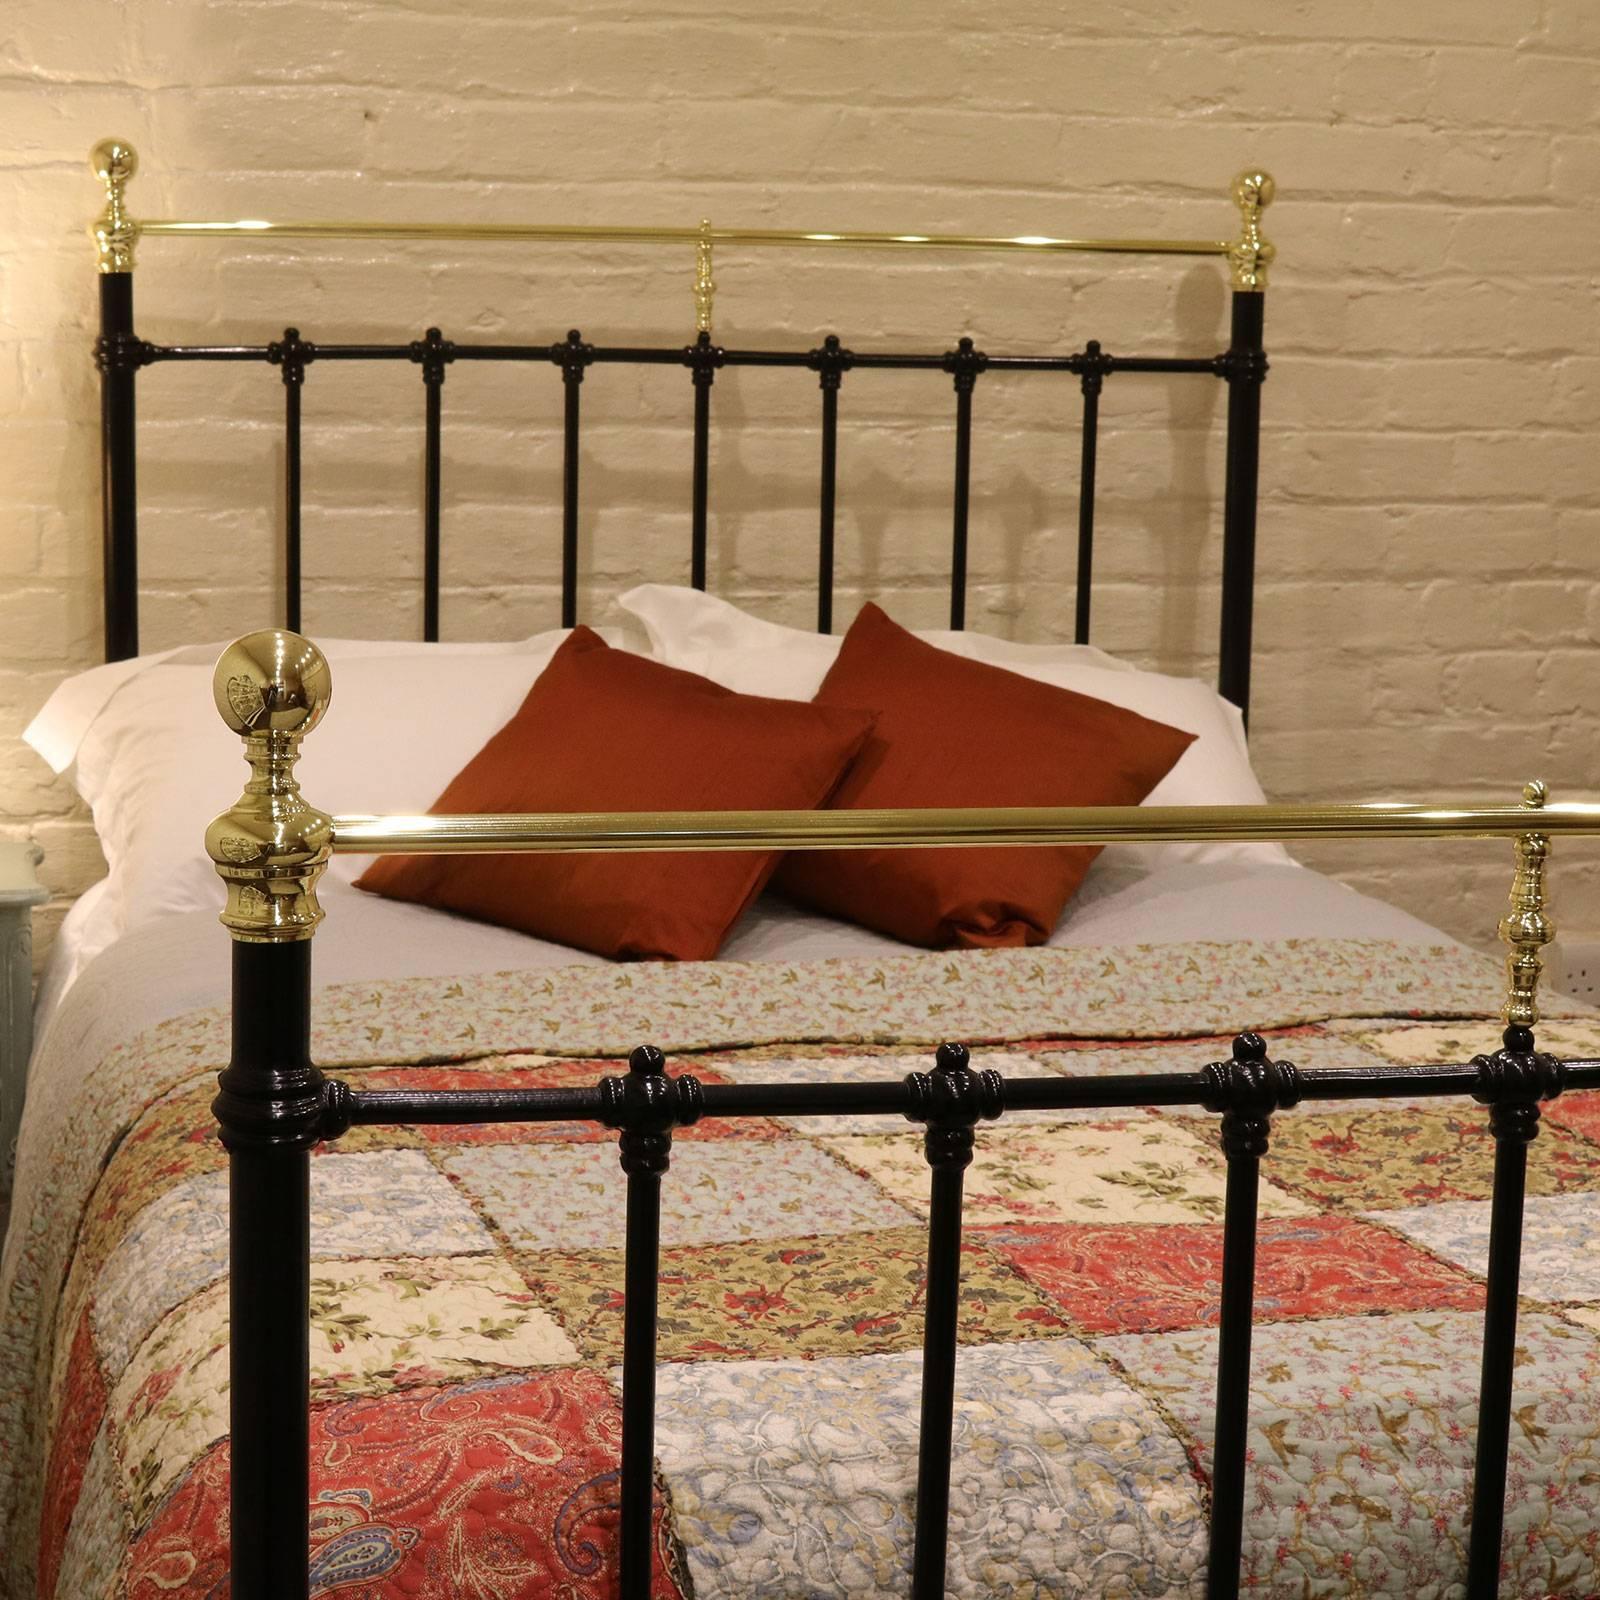 A fine example of a Victorian brass and iron bed in the double width and finished in black.

This bed accepts a double size (4'6